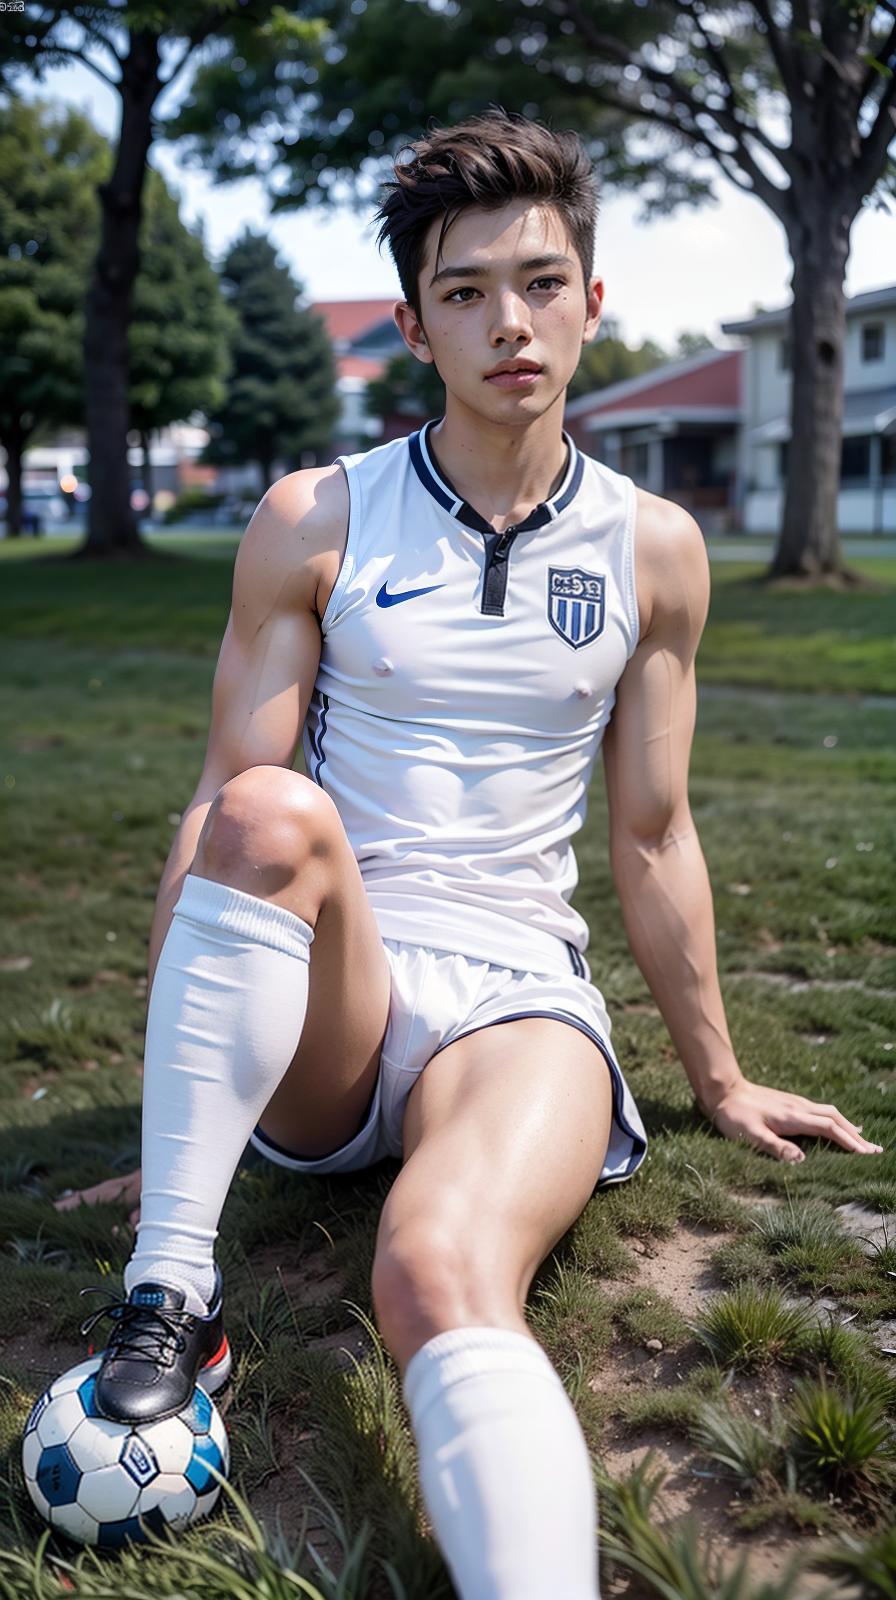  ultra high res, (photorealistic:1.4), raw photo, (realistic face), realistic eyes, (realistic skin), <lora:XXMix9_v20LoRa:0.8>, handsome, (male:2), (asian:1.6), (soccer players:1.2), (short hair:1.2), (pompadour:1.4), (white briefs:1.3), (sleeveless:1.2), spike shoes, (soccer shin guards:1.3), young, sitting posture, (spread legs:1.1), real skin, (sexy posing:1.3), hot guy, (muscular:1.3), (naked:1.1), (bulge:1.1), trained calves, thigh, realistic, lifelike, high quality, photos taken with a single-lens reflex camera, (looking at the camera:1.2)